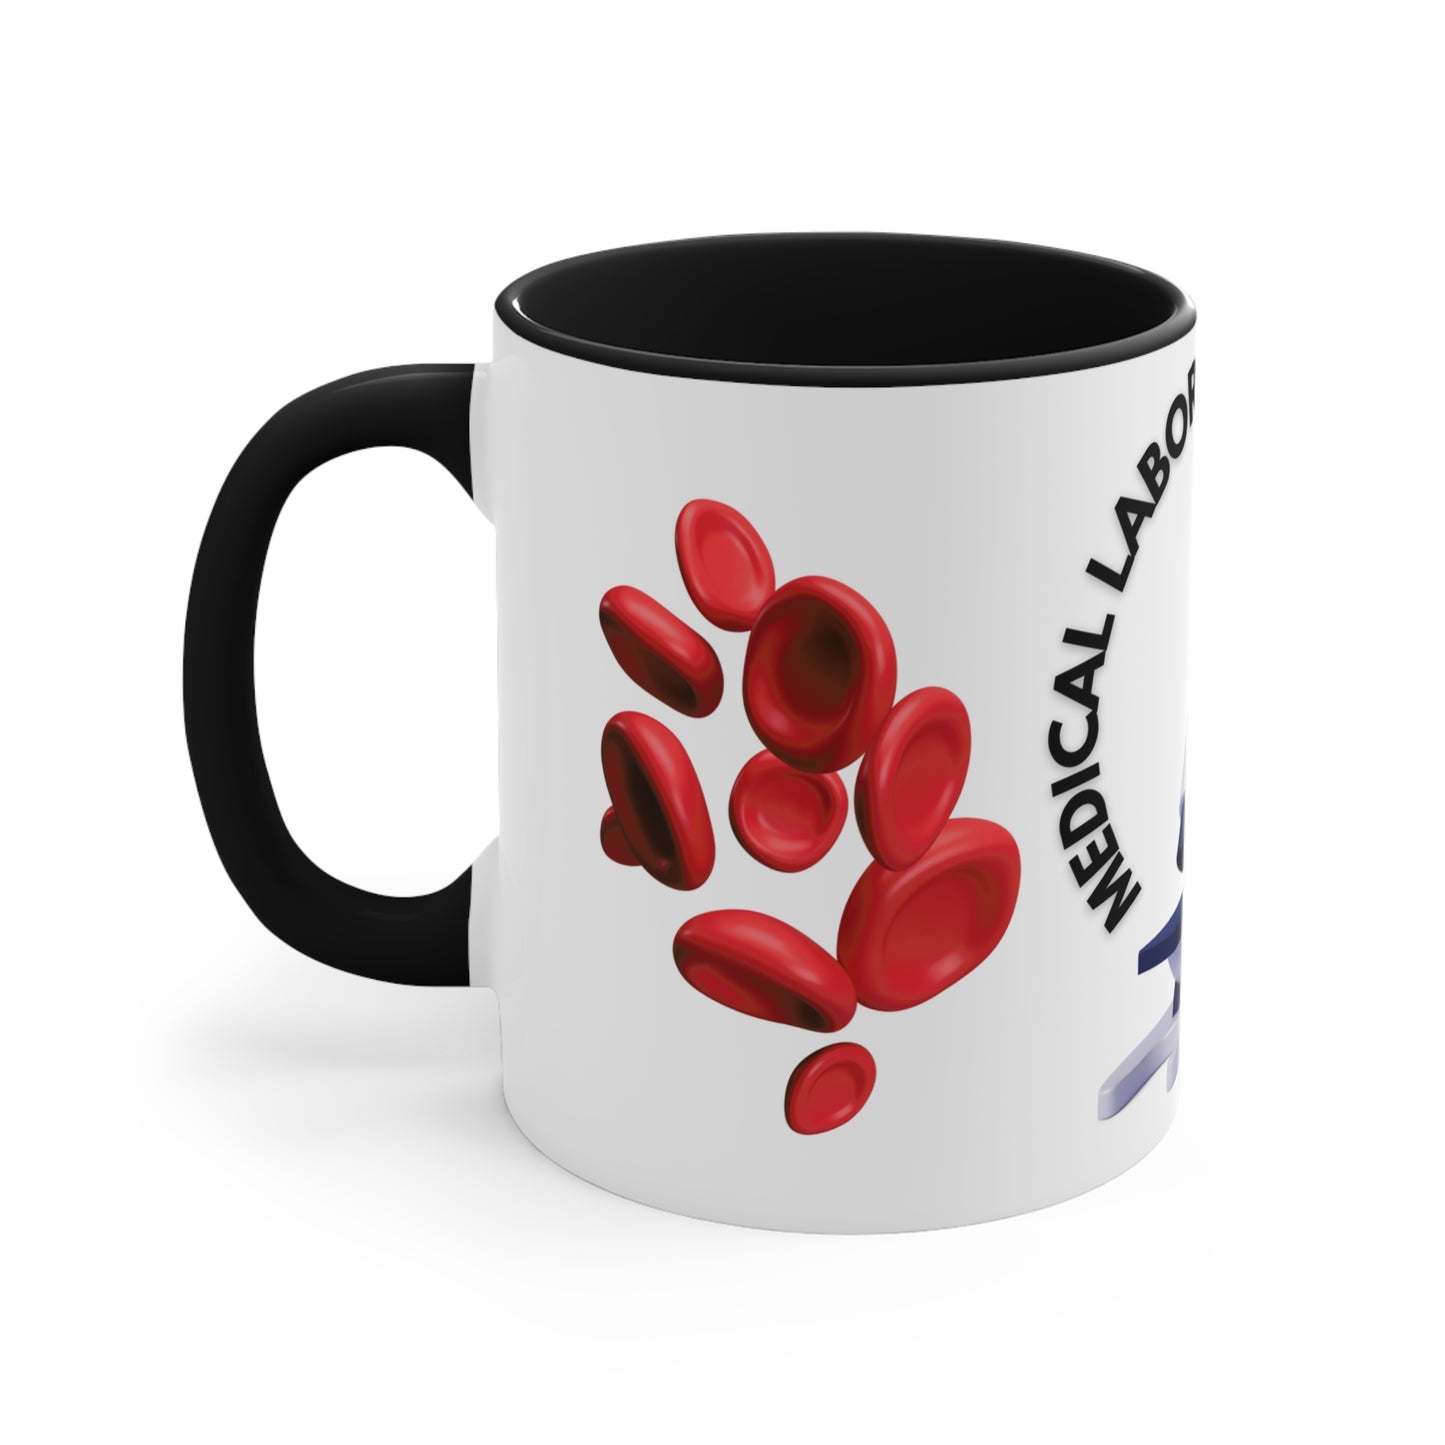 MEDICAL LABORATORY SCIENTIST MUG - Available with red or black accents -MUGSCITY - Free Shipping